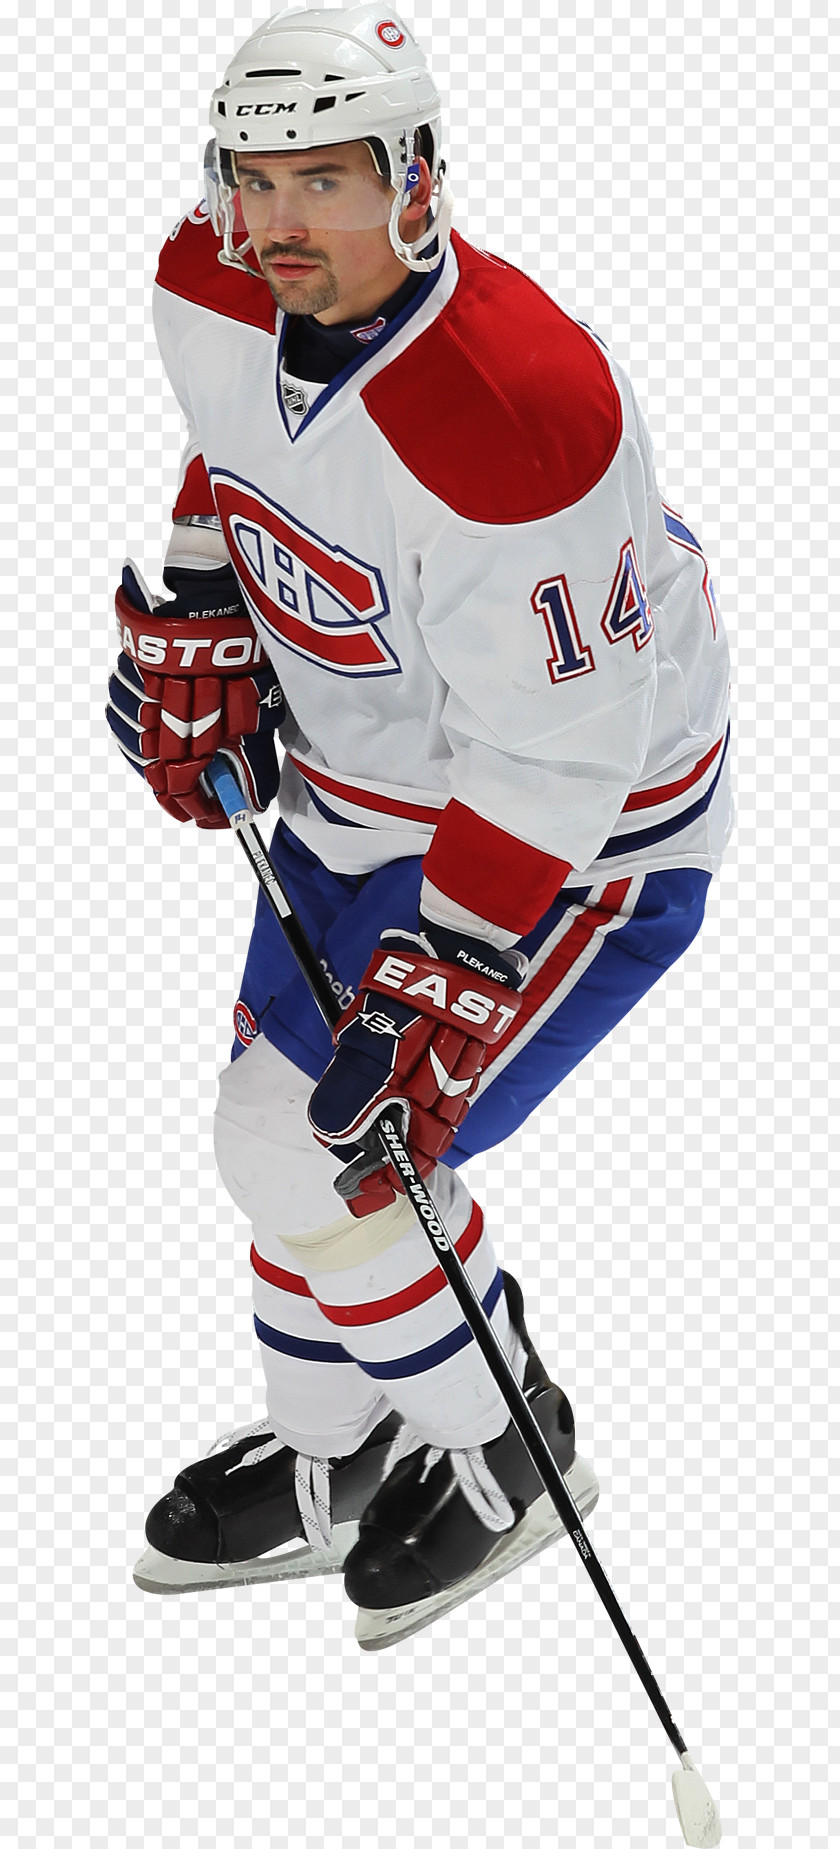 Montreal Canadiens College Ice Hockey Goaltender Mask Defenceman Protective Pants & Ski Shorts PNG